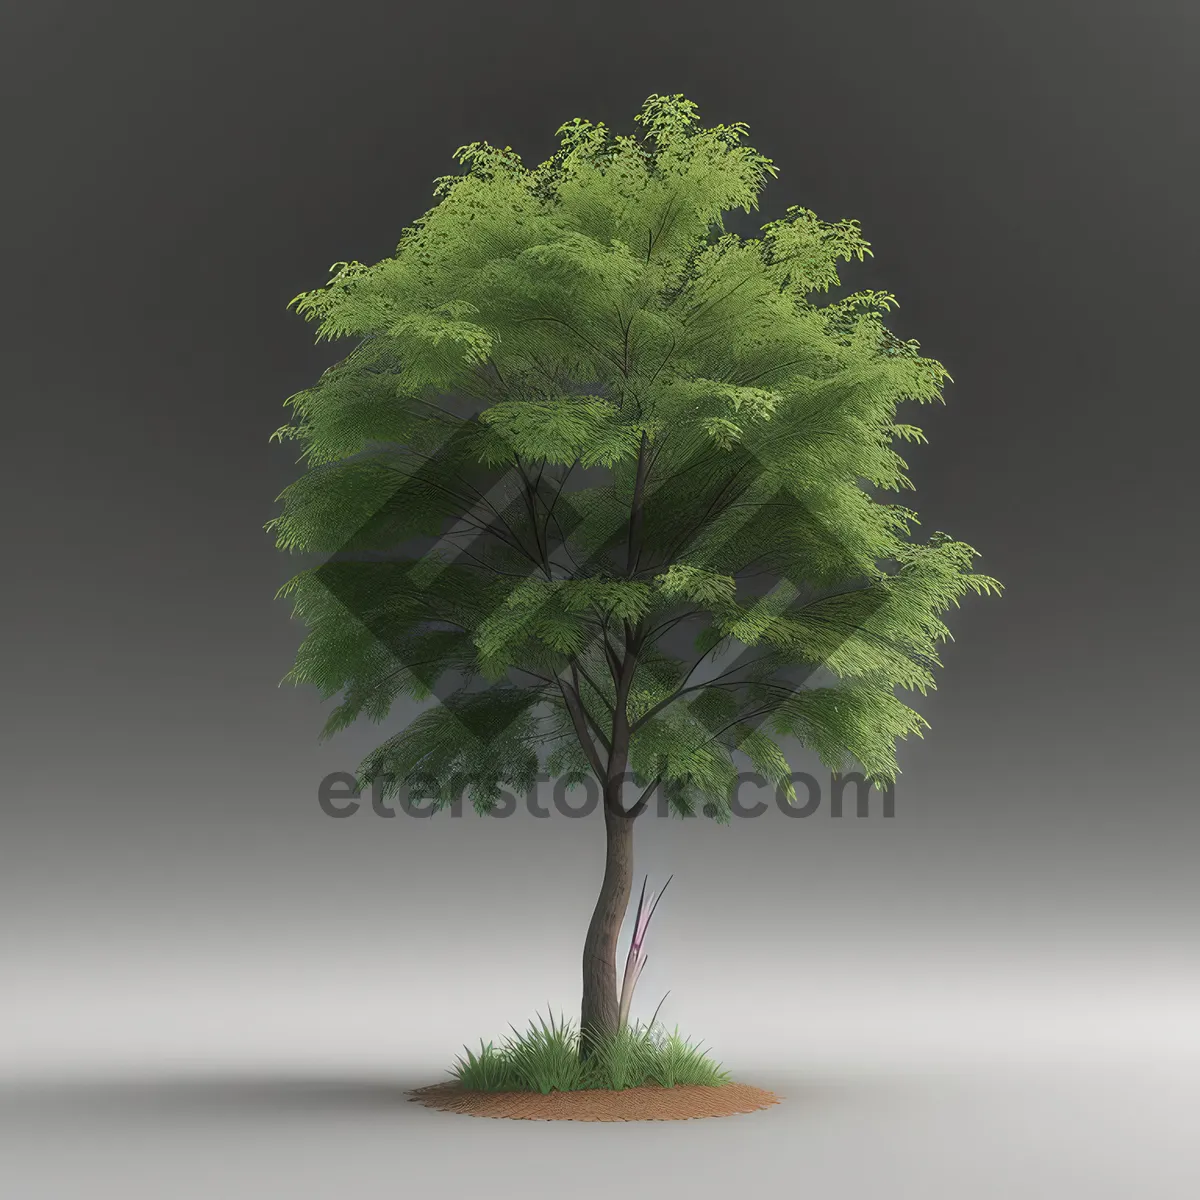 Picture of Evergreen Leafy Bonsai in Natural Forest